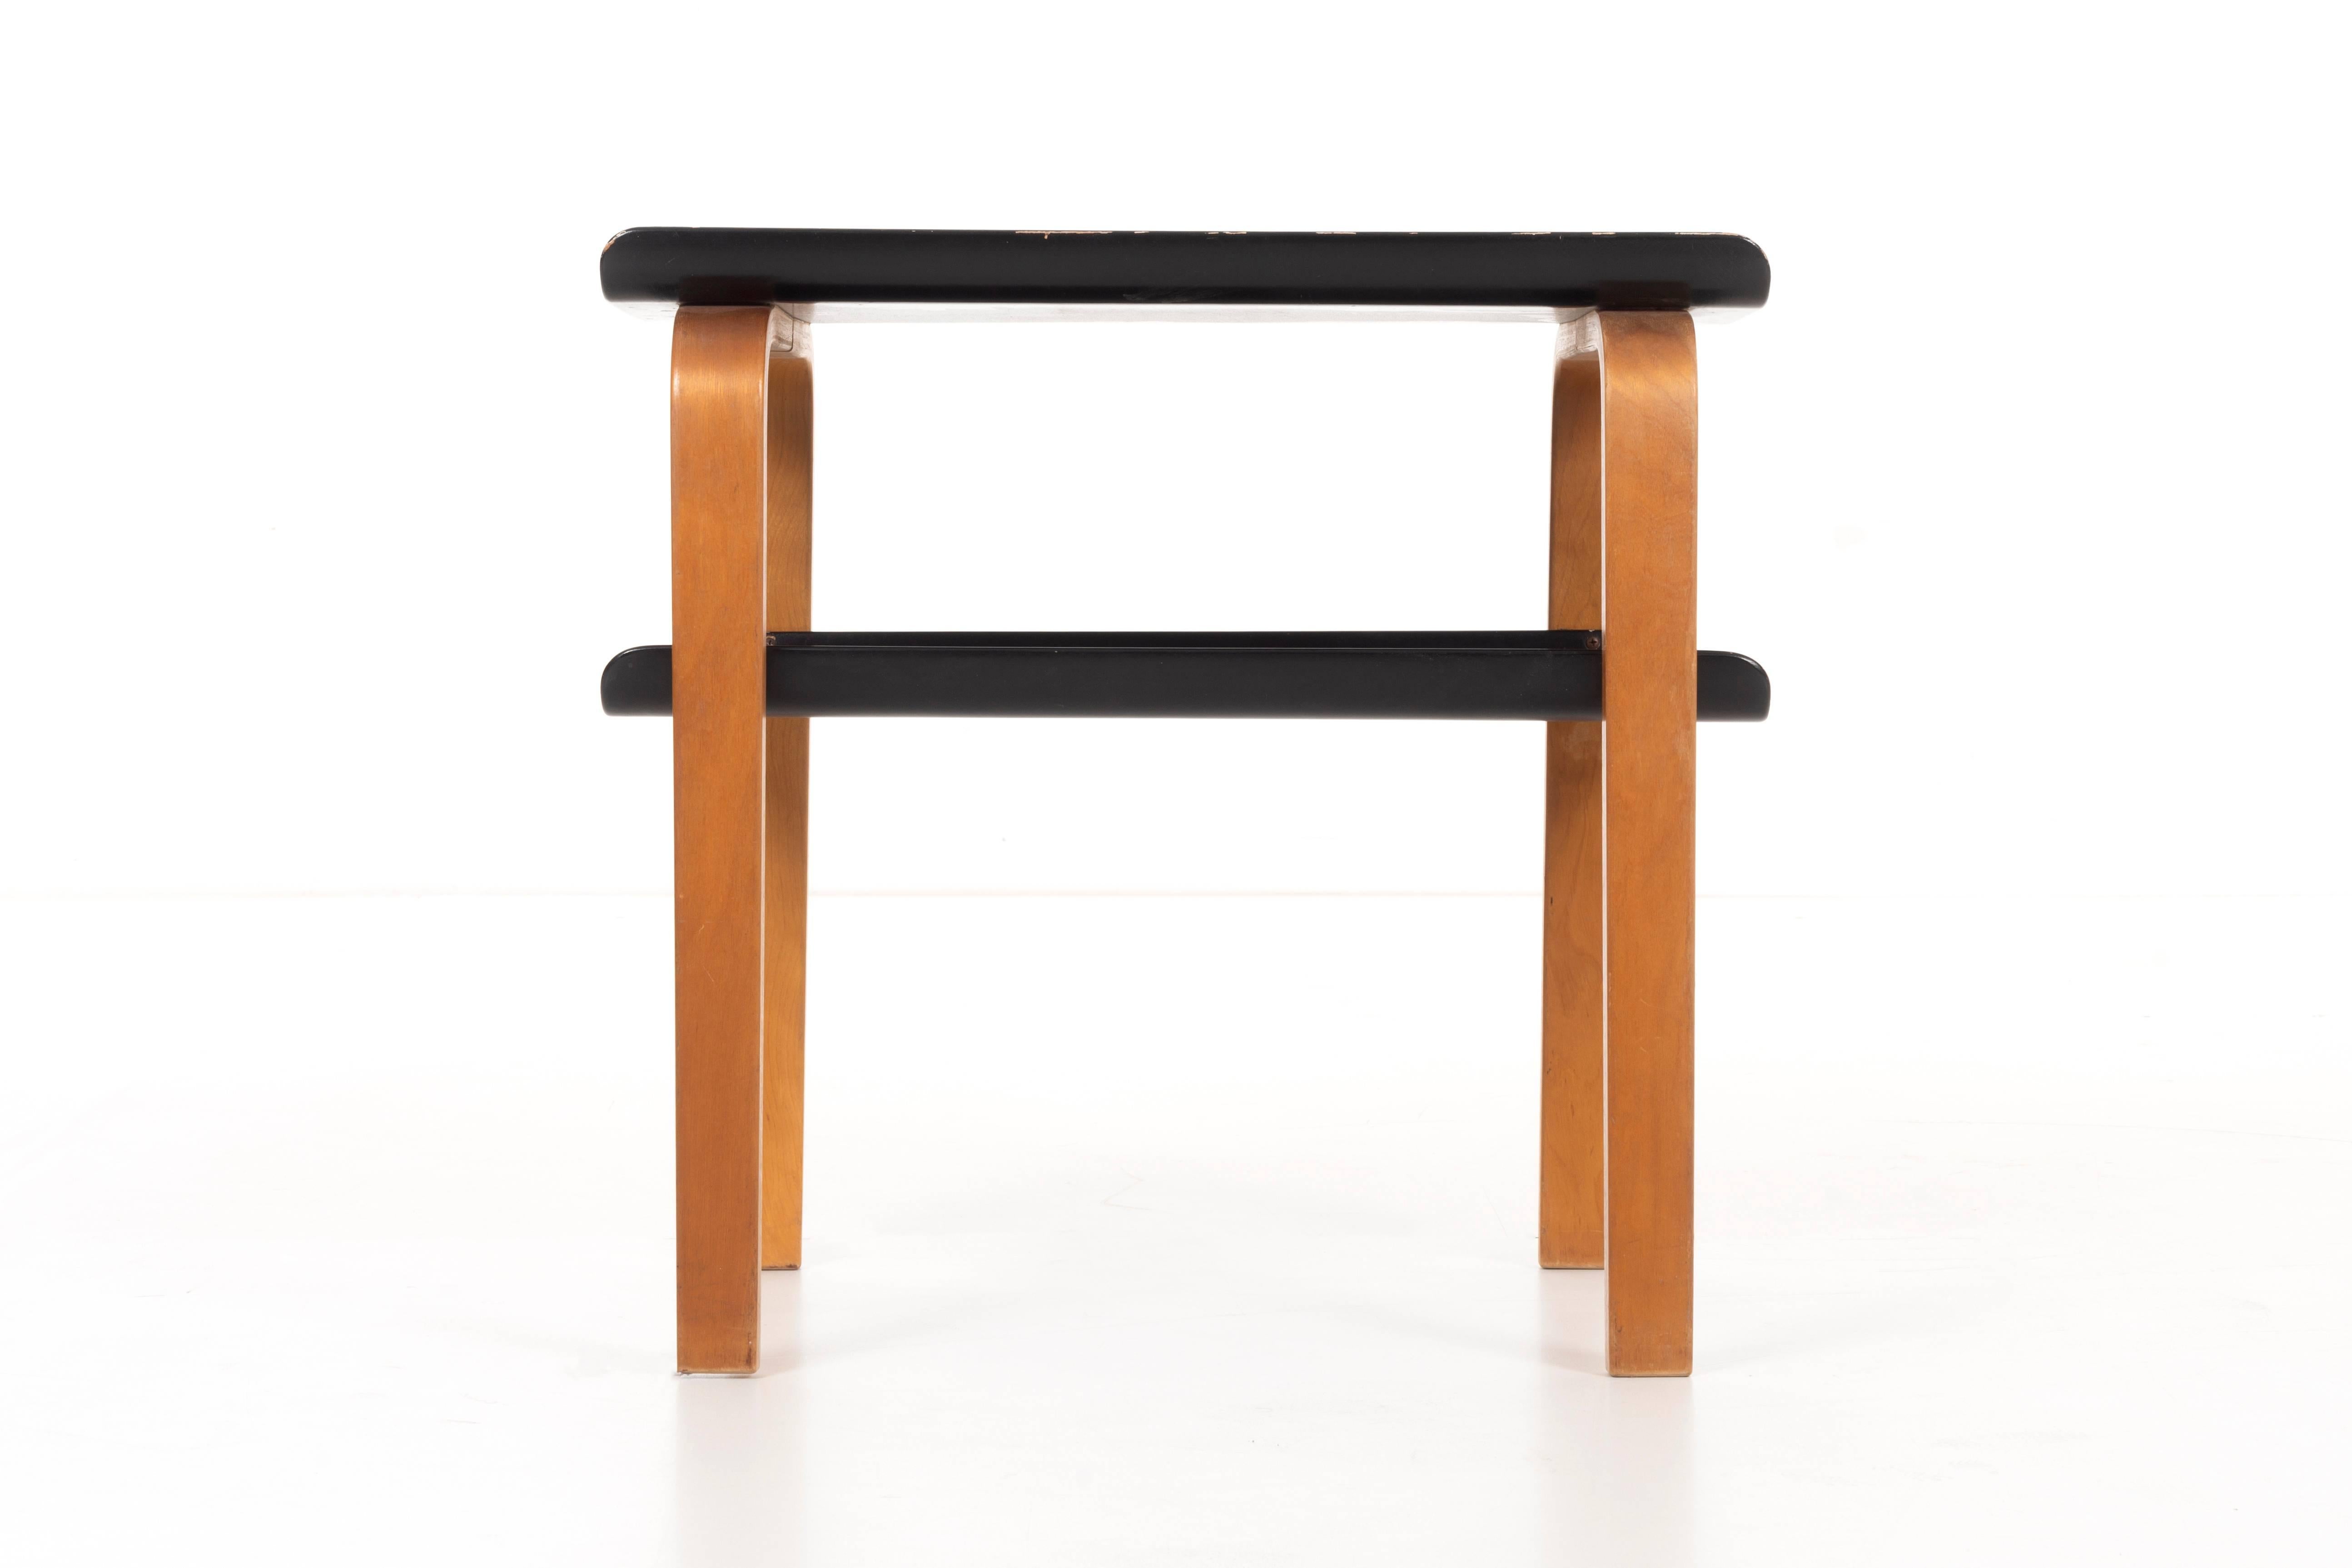 Alvar Aalto designed this table, along with several other of his most iconic works, for the Paimio Sanatorium project in Finland in 1932. Later produced by Artek.